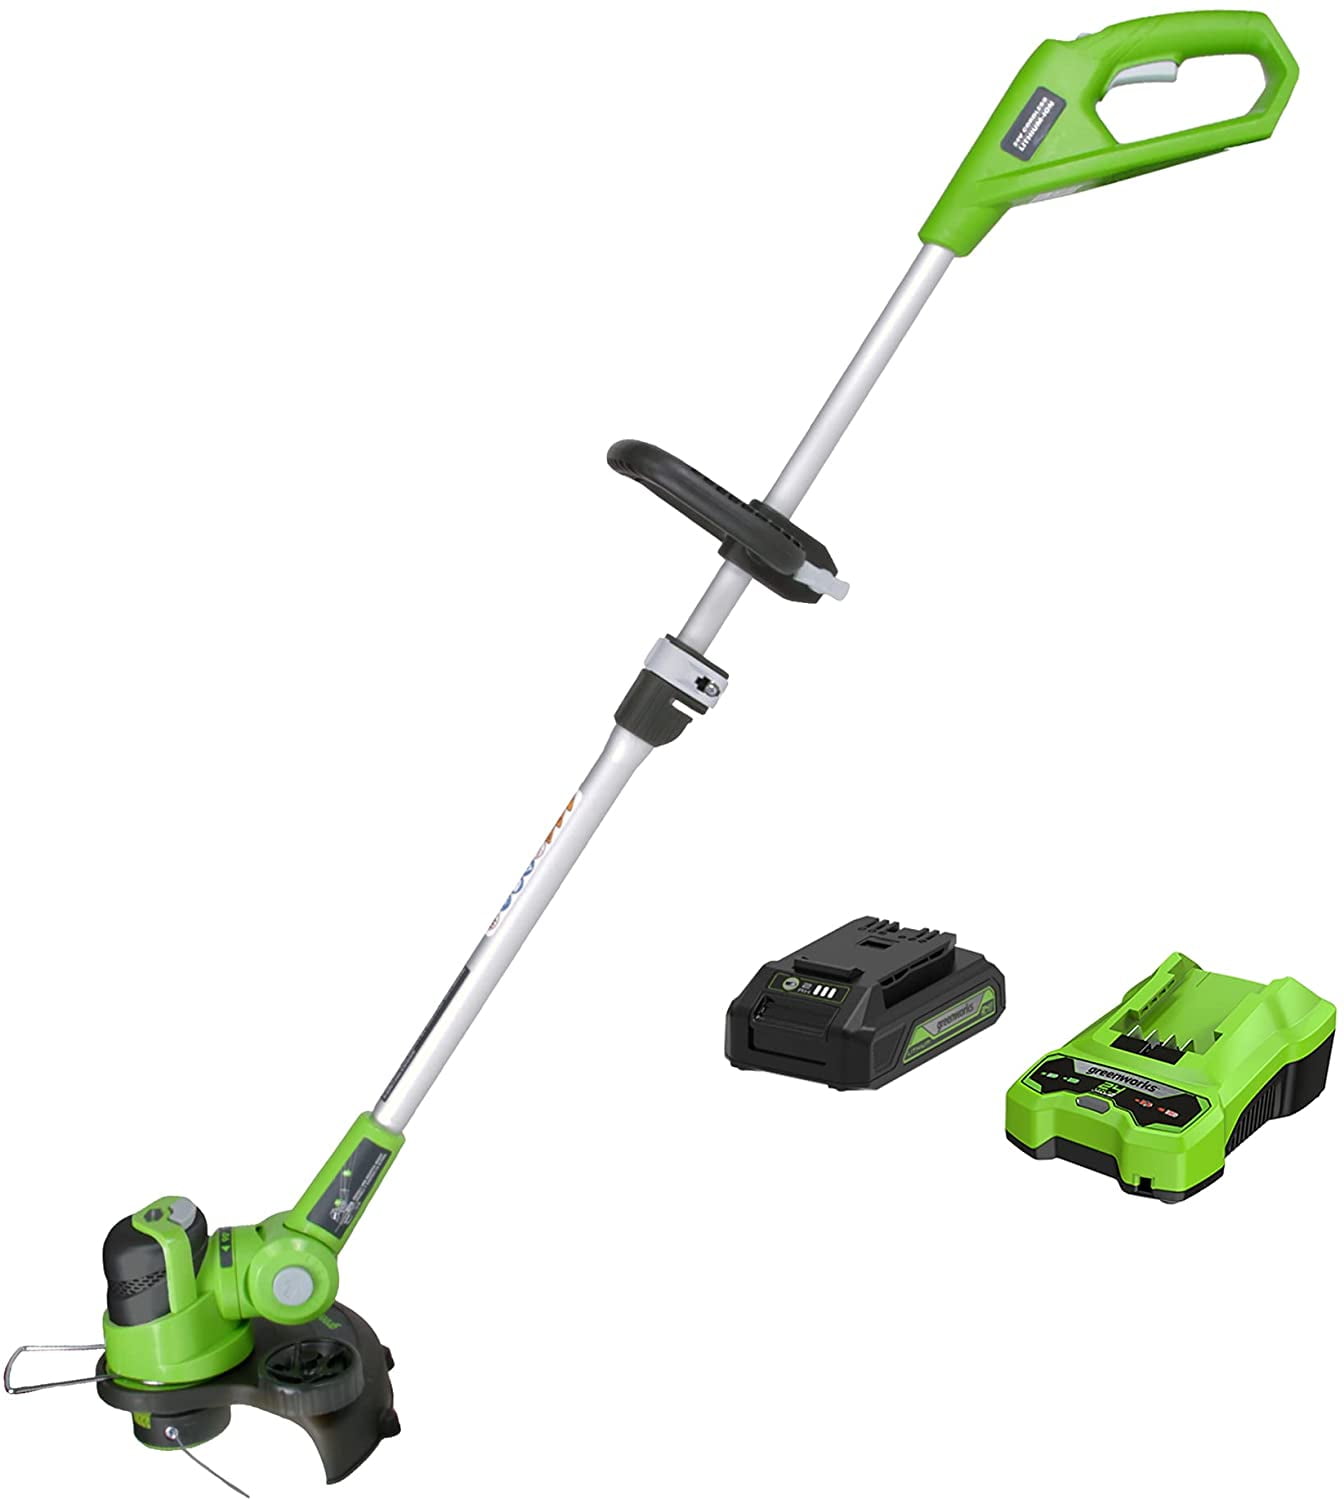 9.4" Cordless String Trimmer Edger 20V Electric 2-in-1 Lawn Grass Trimmer Edgers